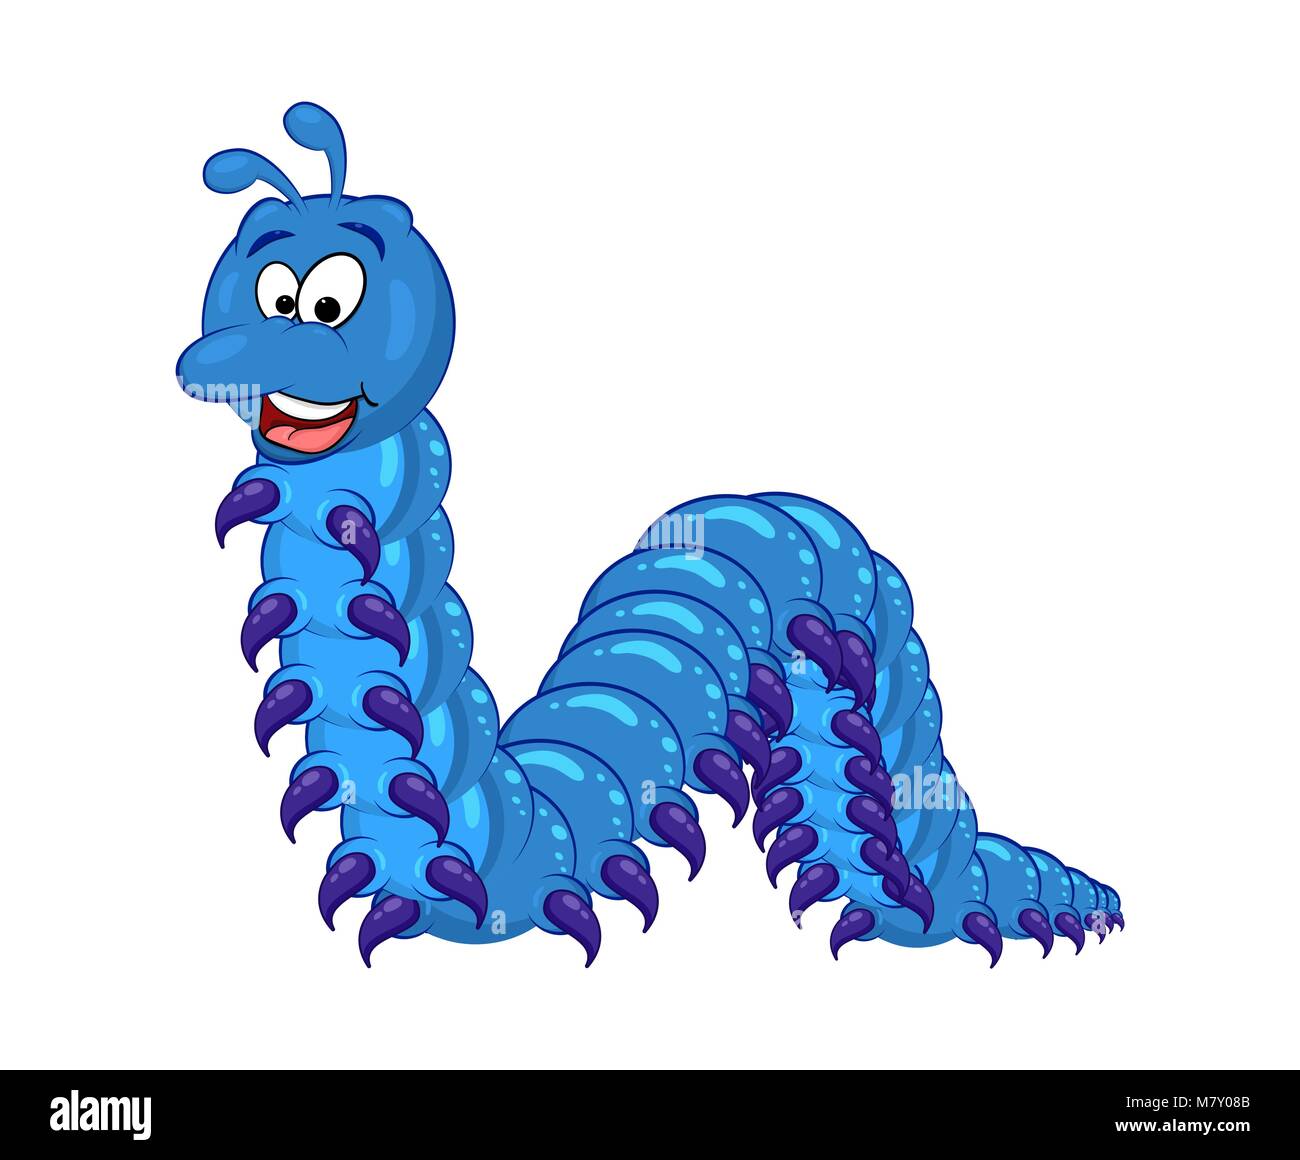 blue cartoon millipede character isolated on white background Stock Vector